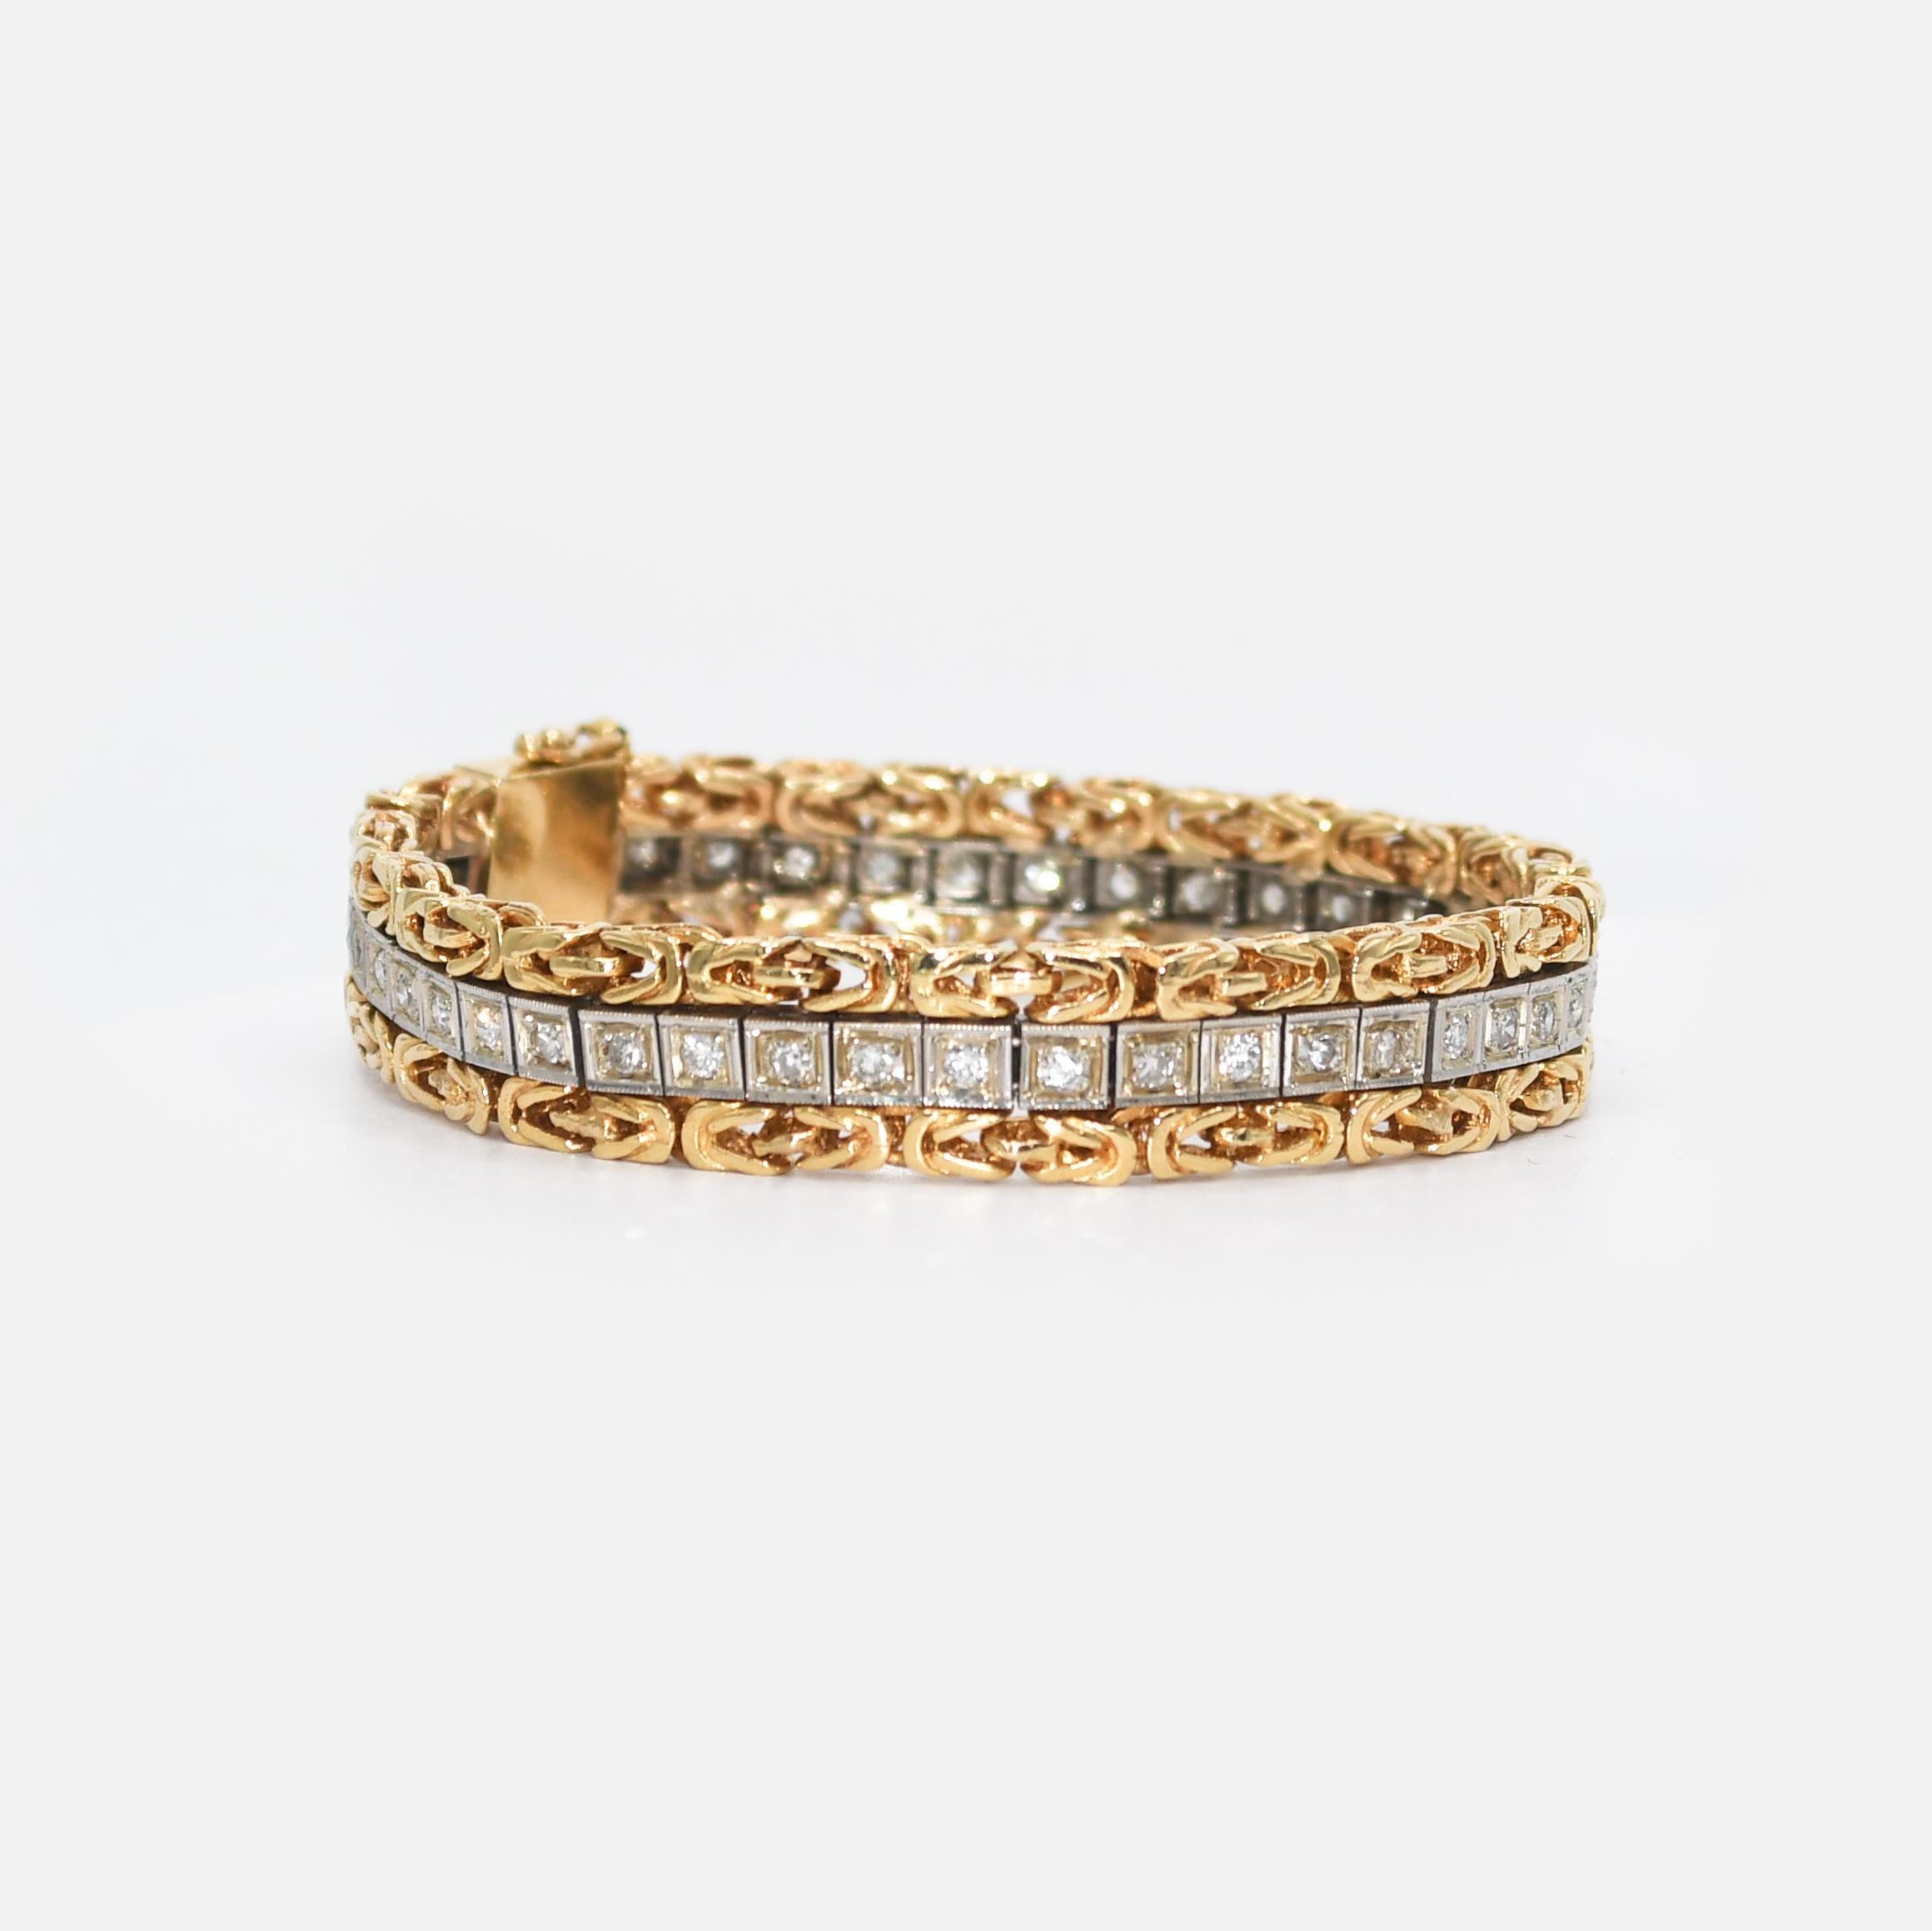 14k yellow gold and diamond bracelet.
Tests 14k with a electronic tester and weighs 29.3 grams.
The bracelet has a fancy woven link style.
The diamonds are a mix of round, single cuts and modern brilliants, 1.00 total carats, h, i, j color range, Si